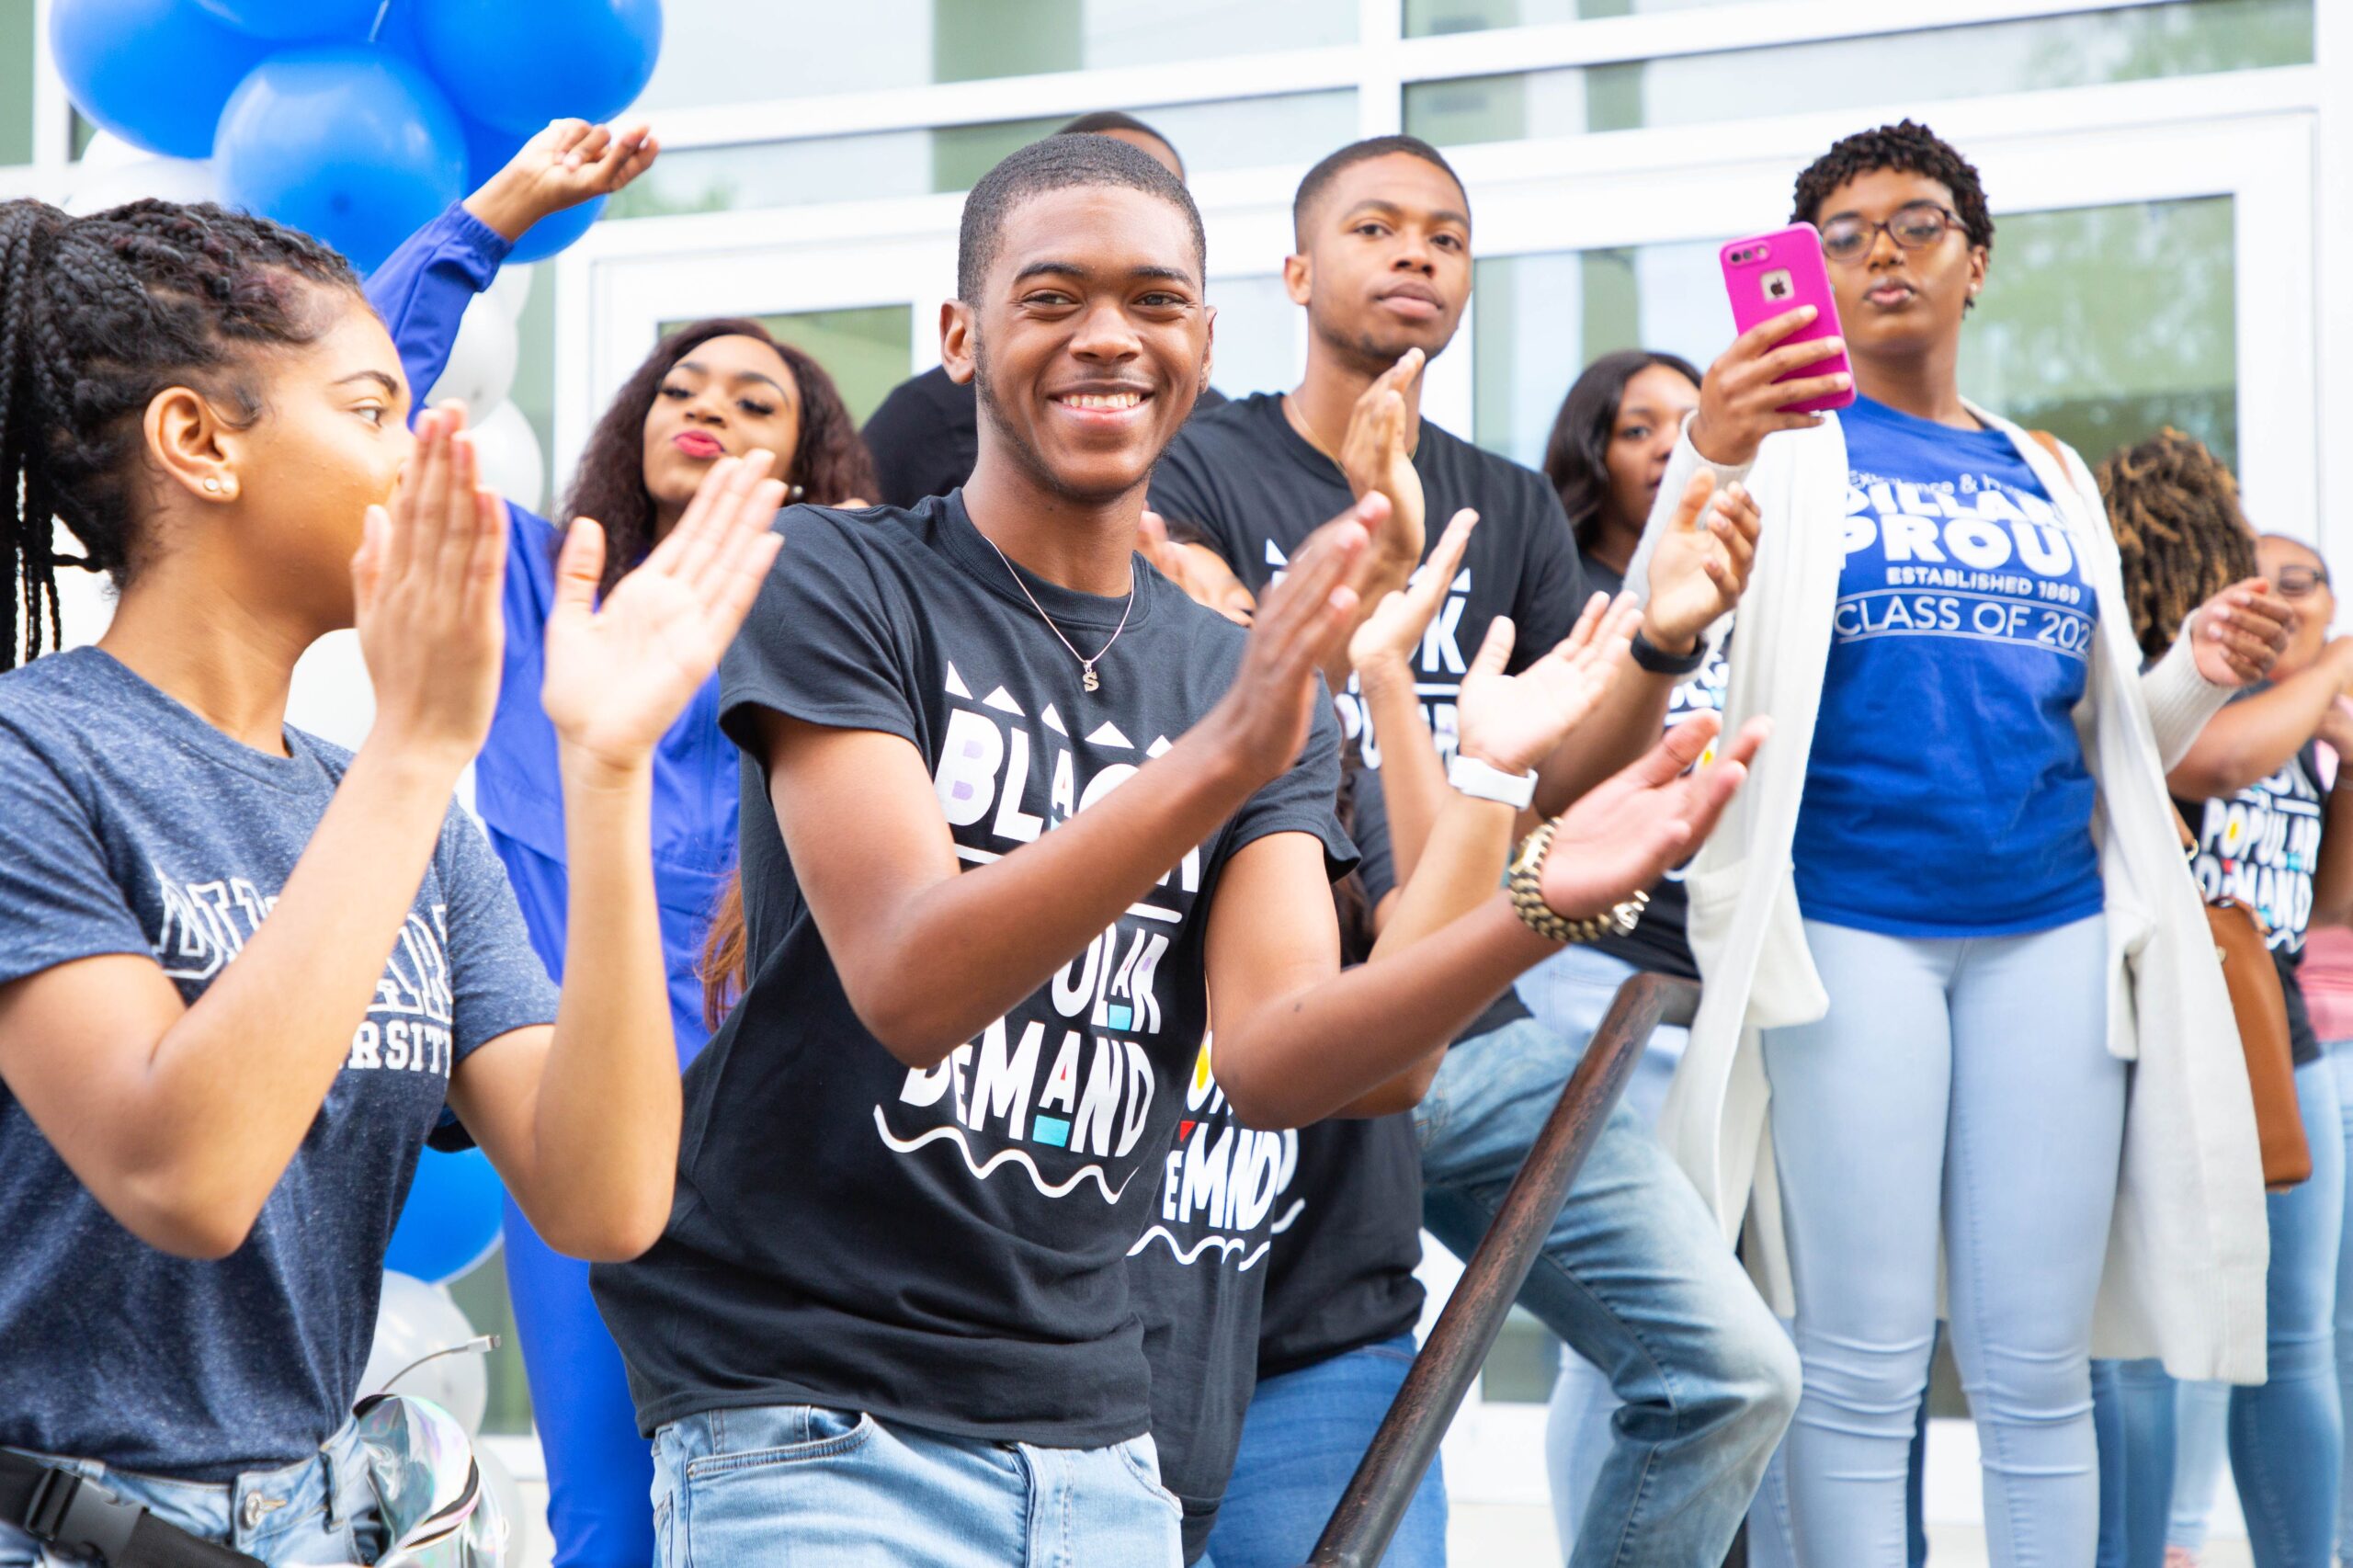 Dillard University student group outdoors clapping